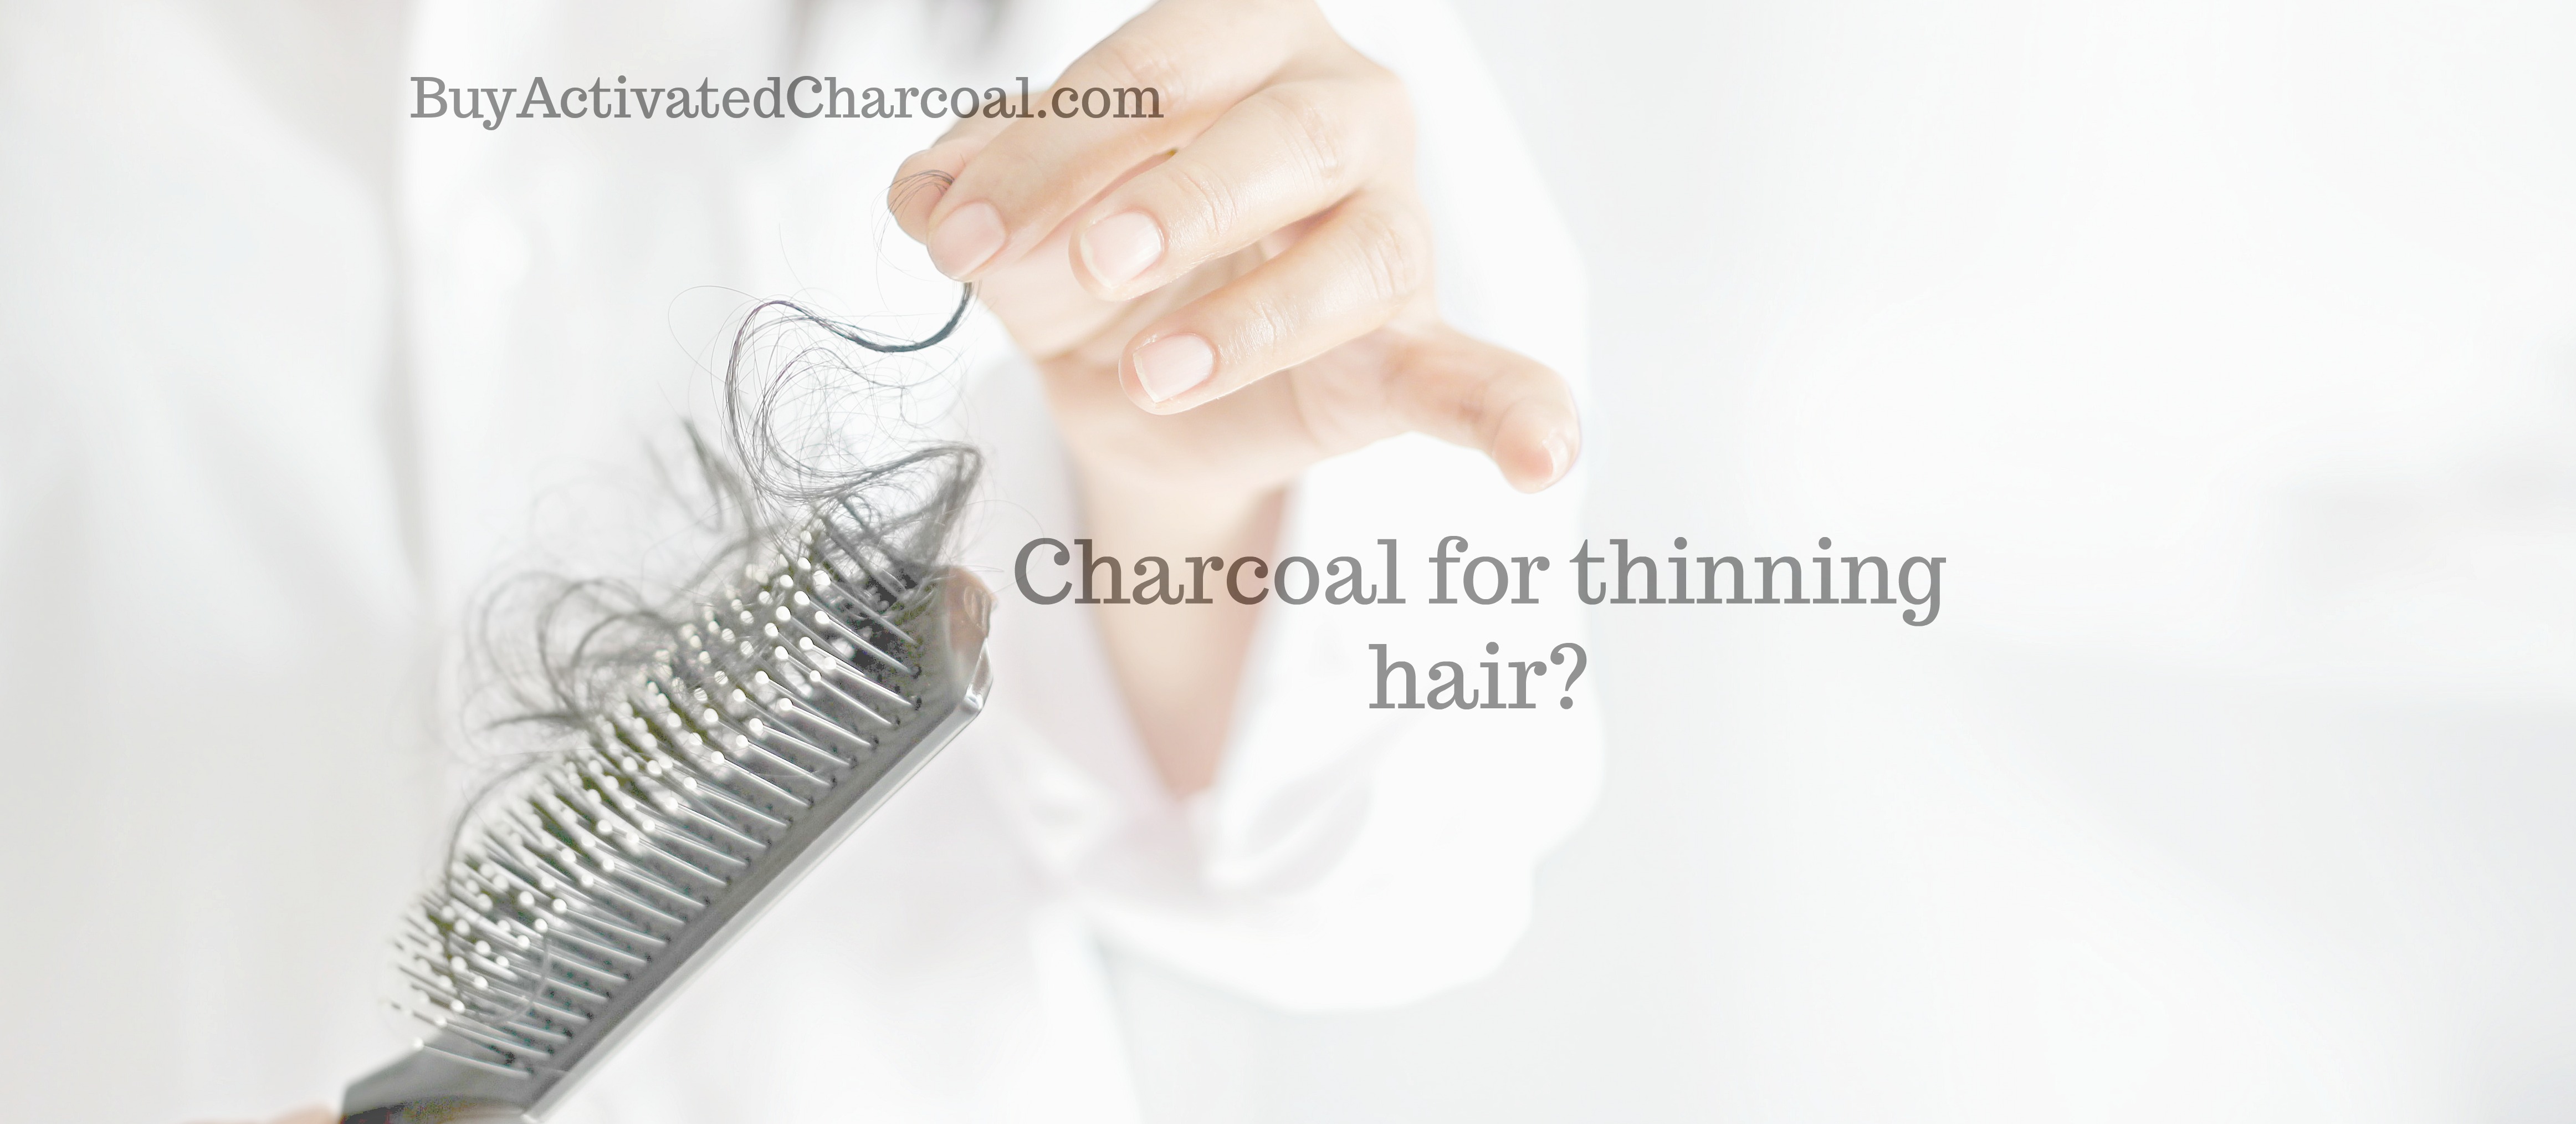 Activated charcoal for thinning hair 2 - Does activated charcoal help thinning hair?